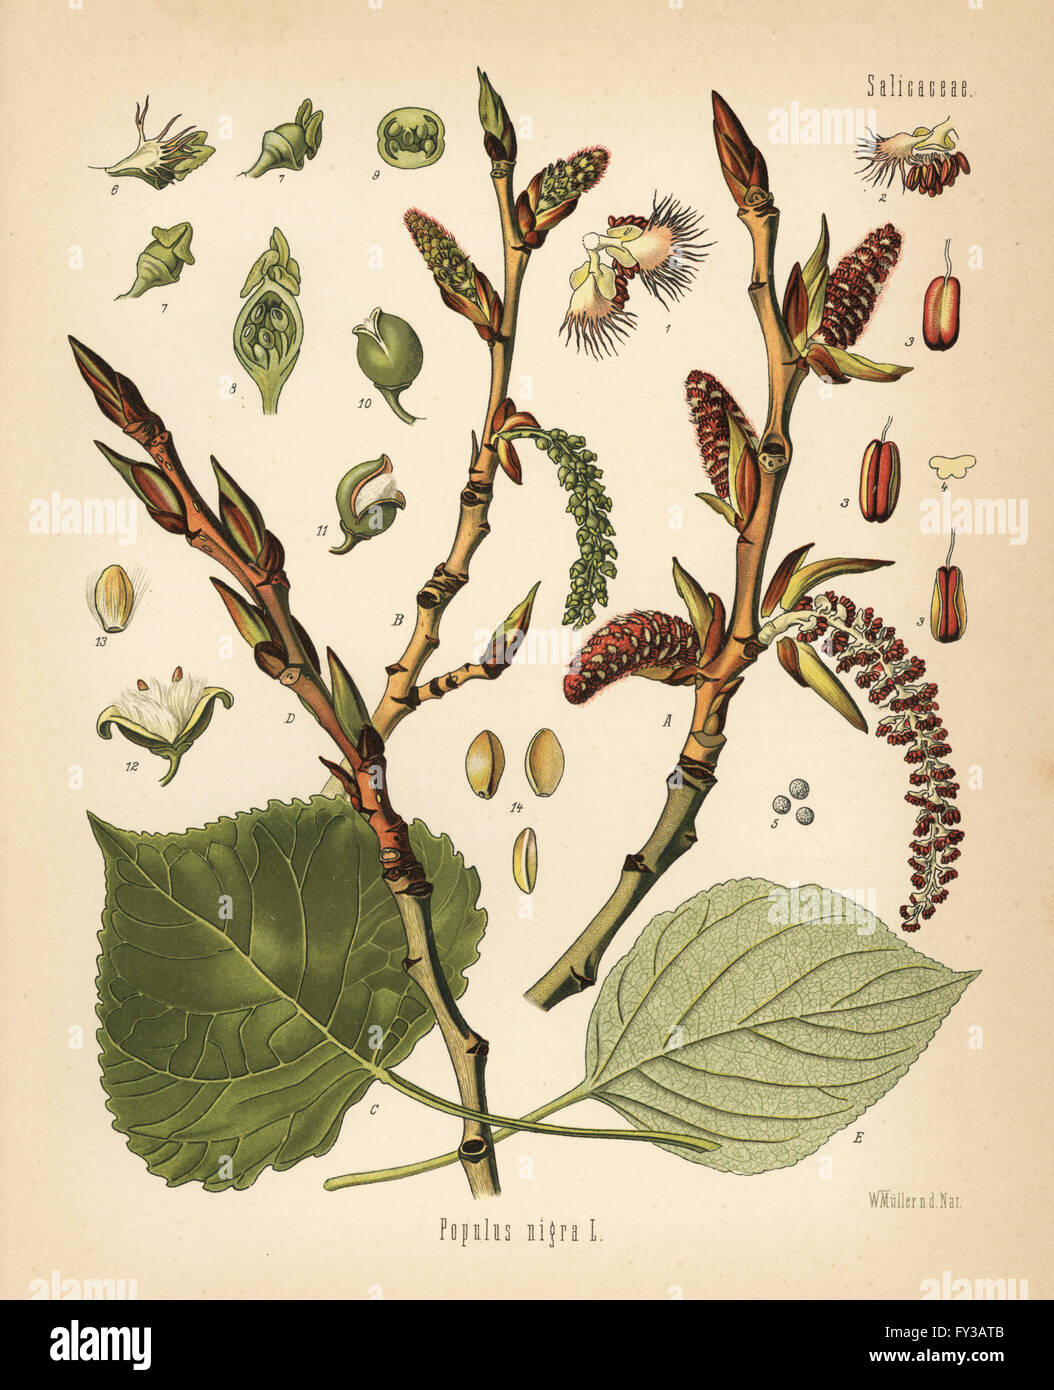 Black poplar tree, Populus nigra. Chromolithograph after a botanical illustration by Walther Muller from Hermann Adolph Koehler's Medicinal Plants, edited by Gustav Pabst, Koehler, Germany, 1887. Stock Photo